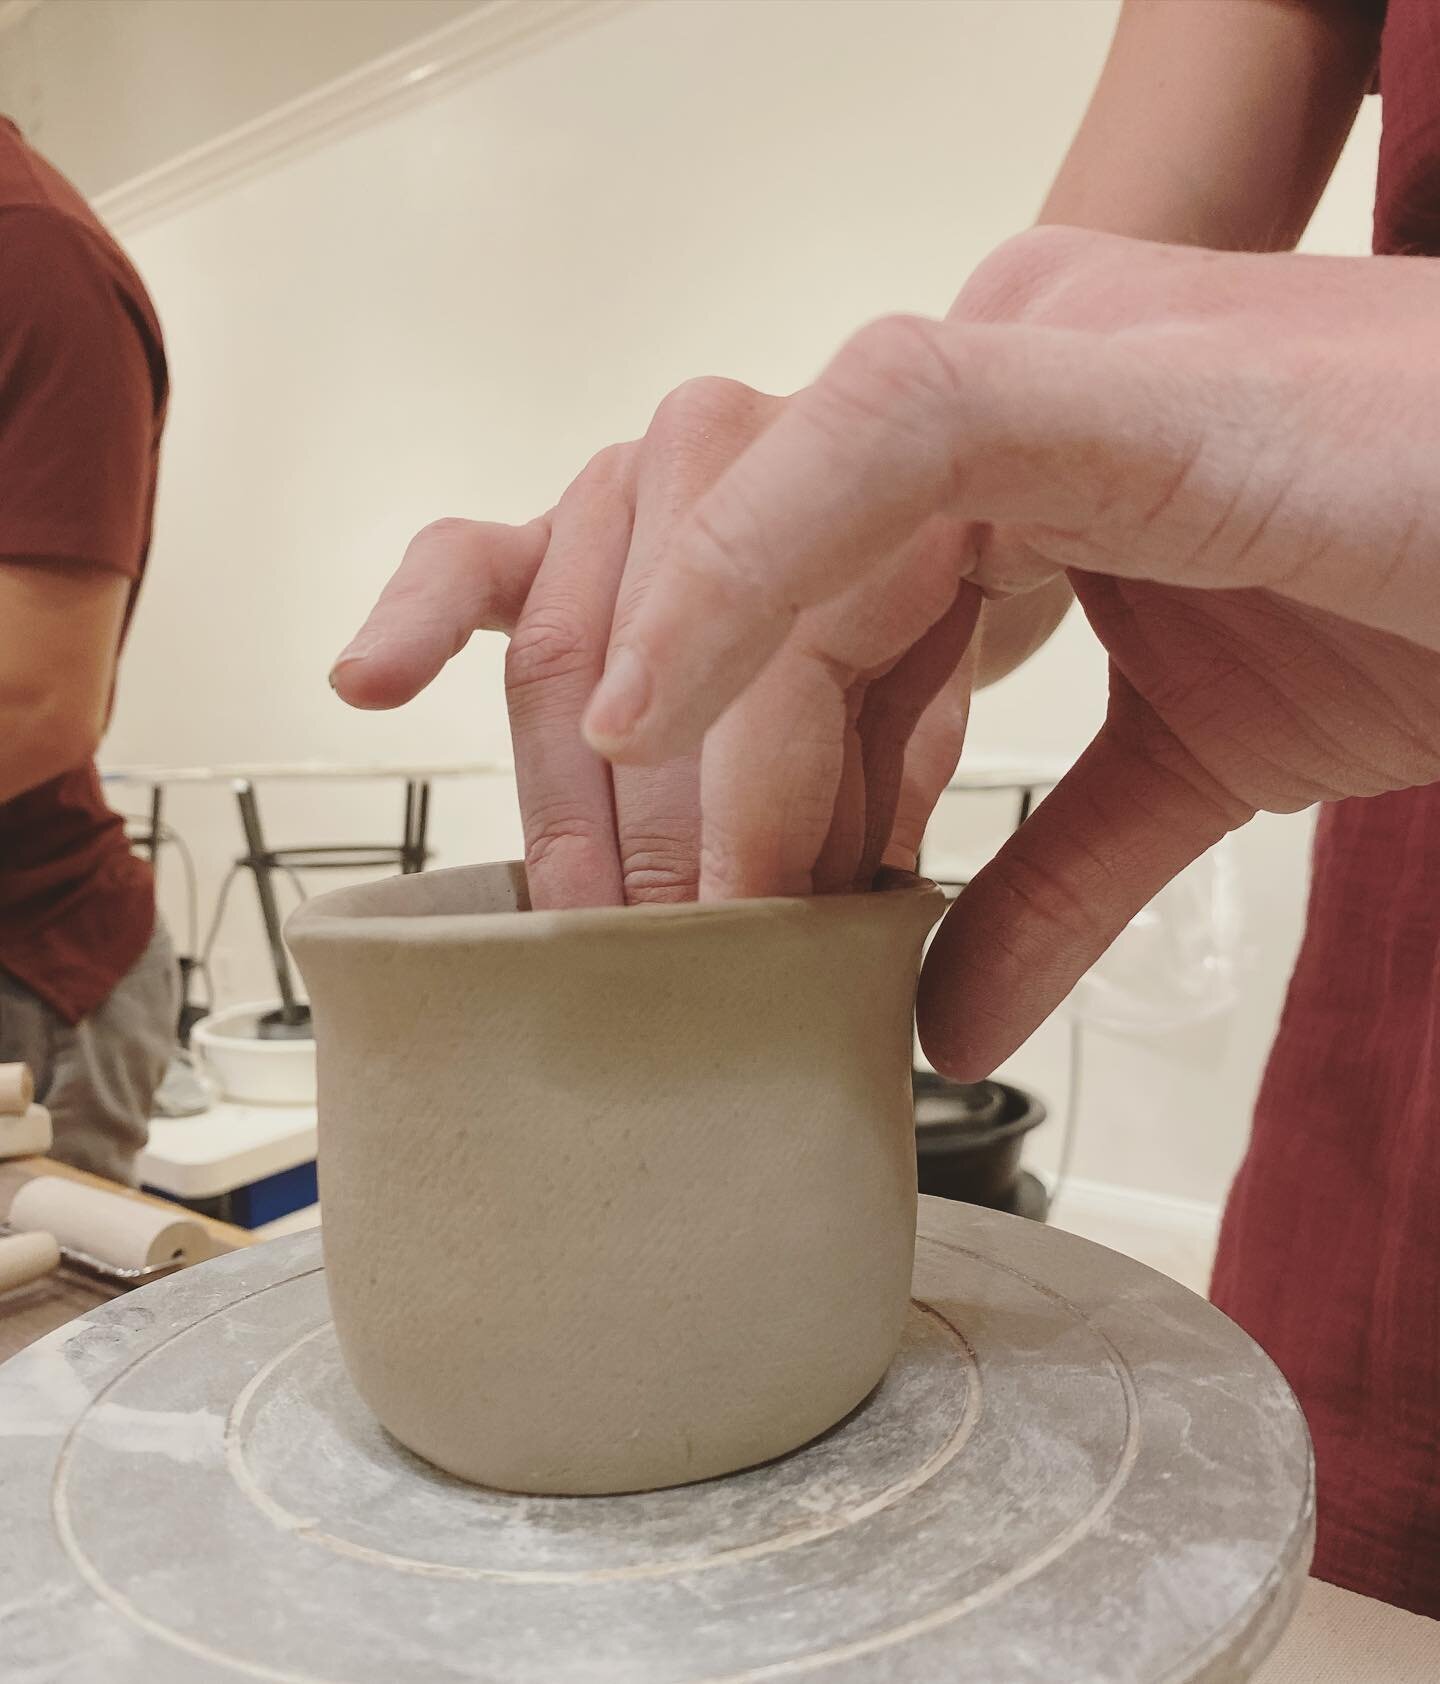 Our ceramic community is expanding and so are our workshops! We will be adding a cup workshop for September. Registration for September will be open in the next two weeks but in the meantime check out our remaining availability in our existing classe